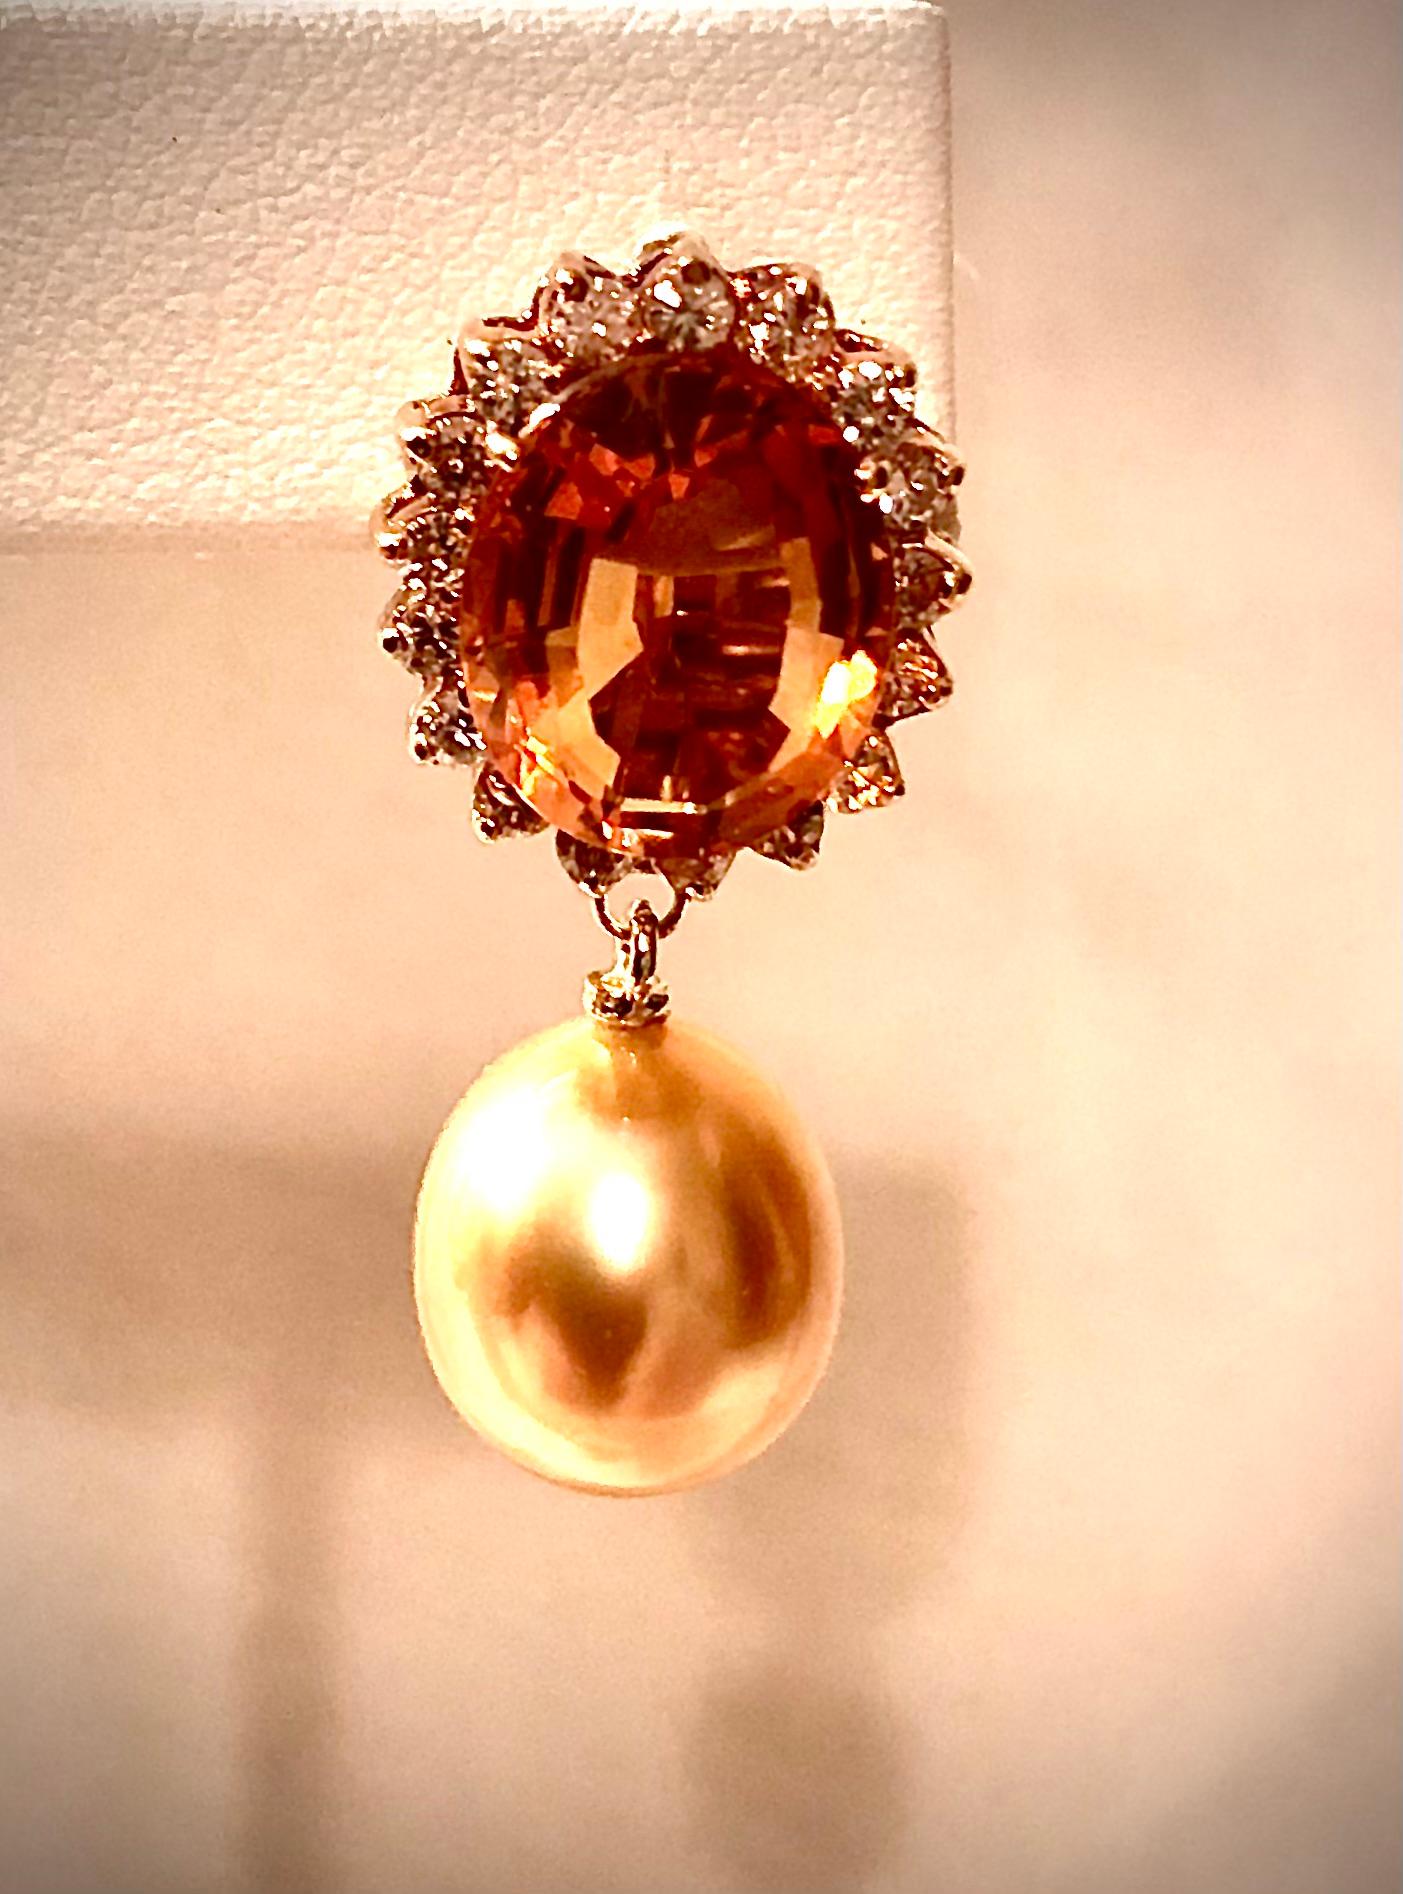 ﻿Elegant and beautiful earrings with large golden pearl. The lustrous golden approximately 12mm x 11mm oval pearls have a smooth shimmering nacre with very few blemishes.

The pearls are suspended from large well cut madeira citrine of a rich deep